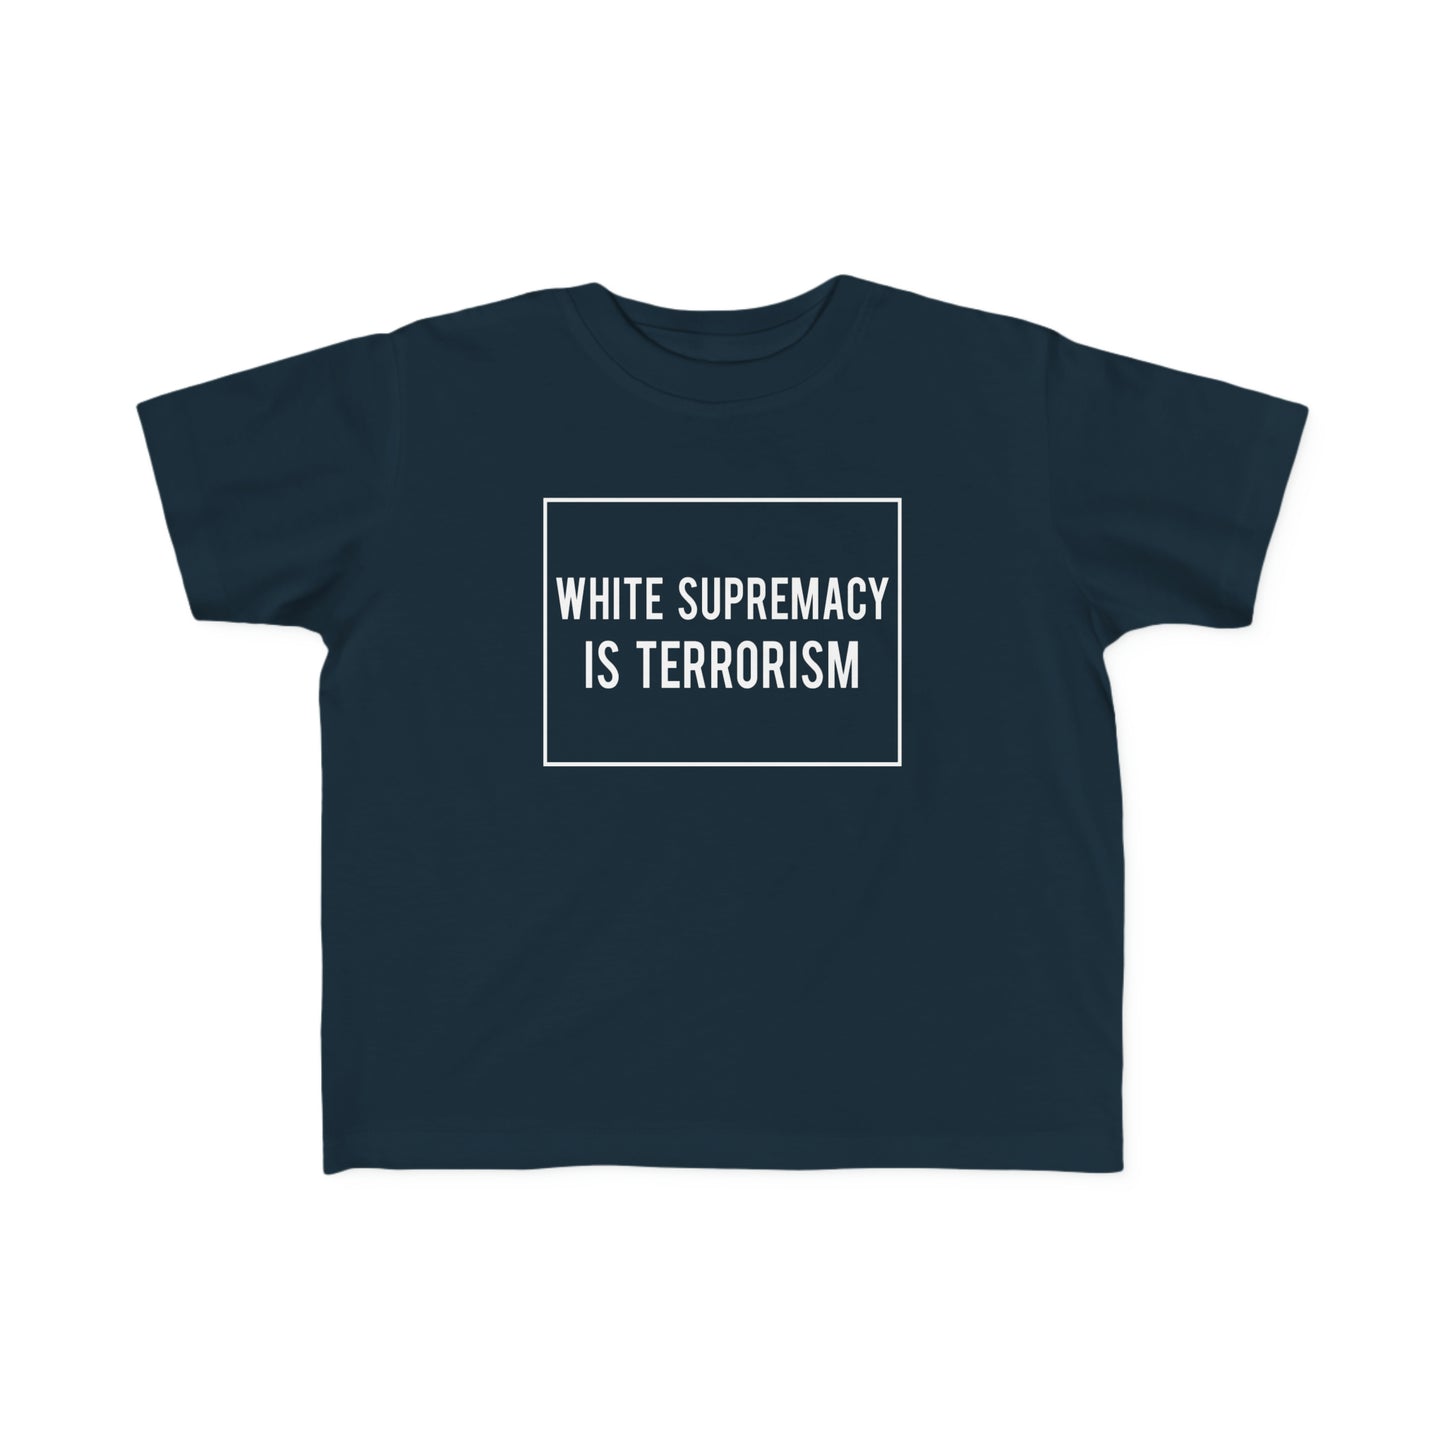 “White Supremacy is Terrorism” Toddler's Tee